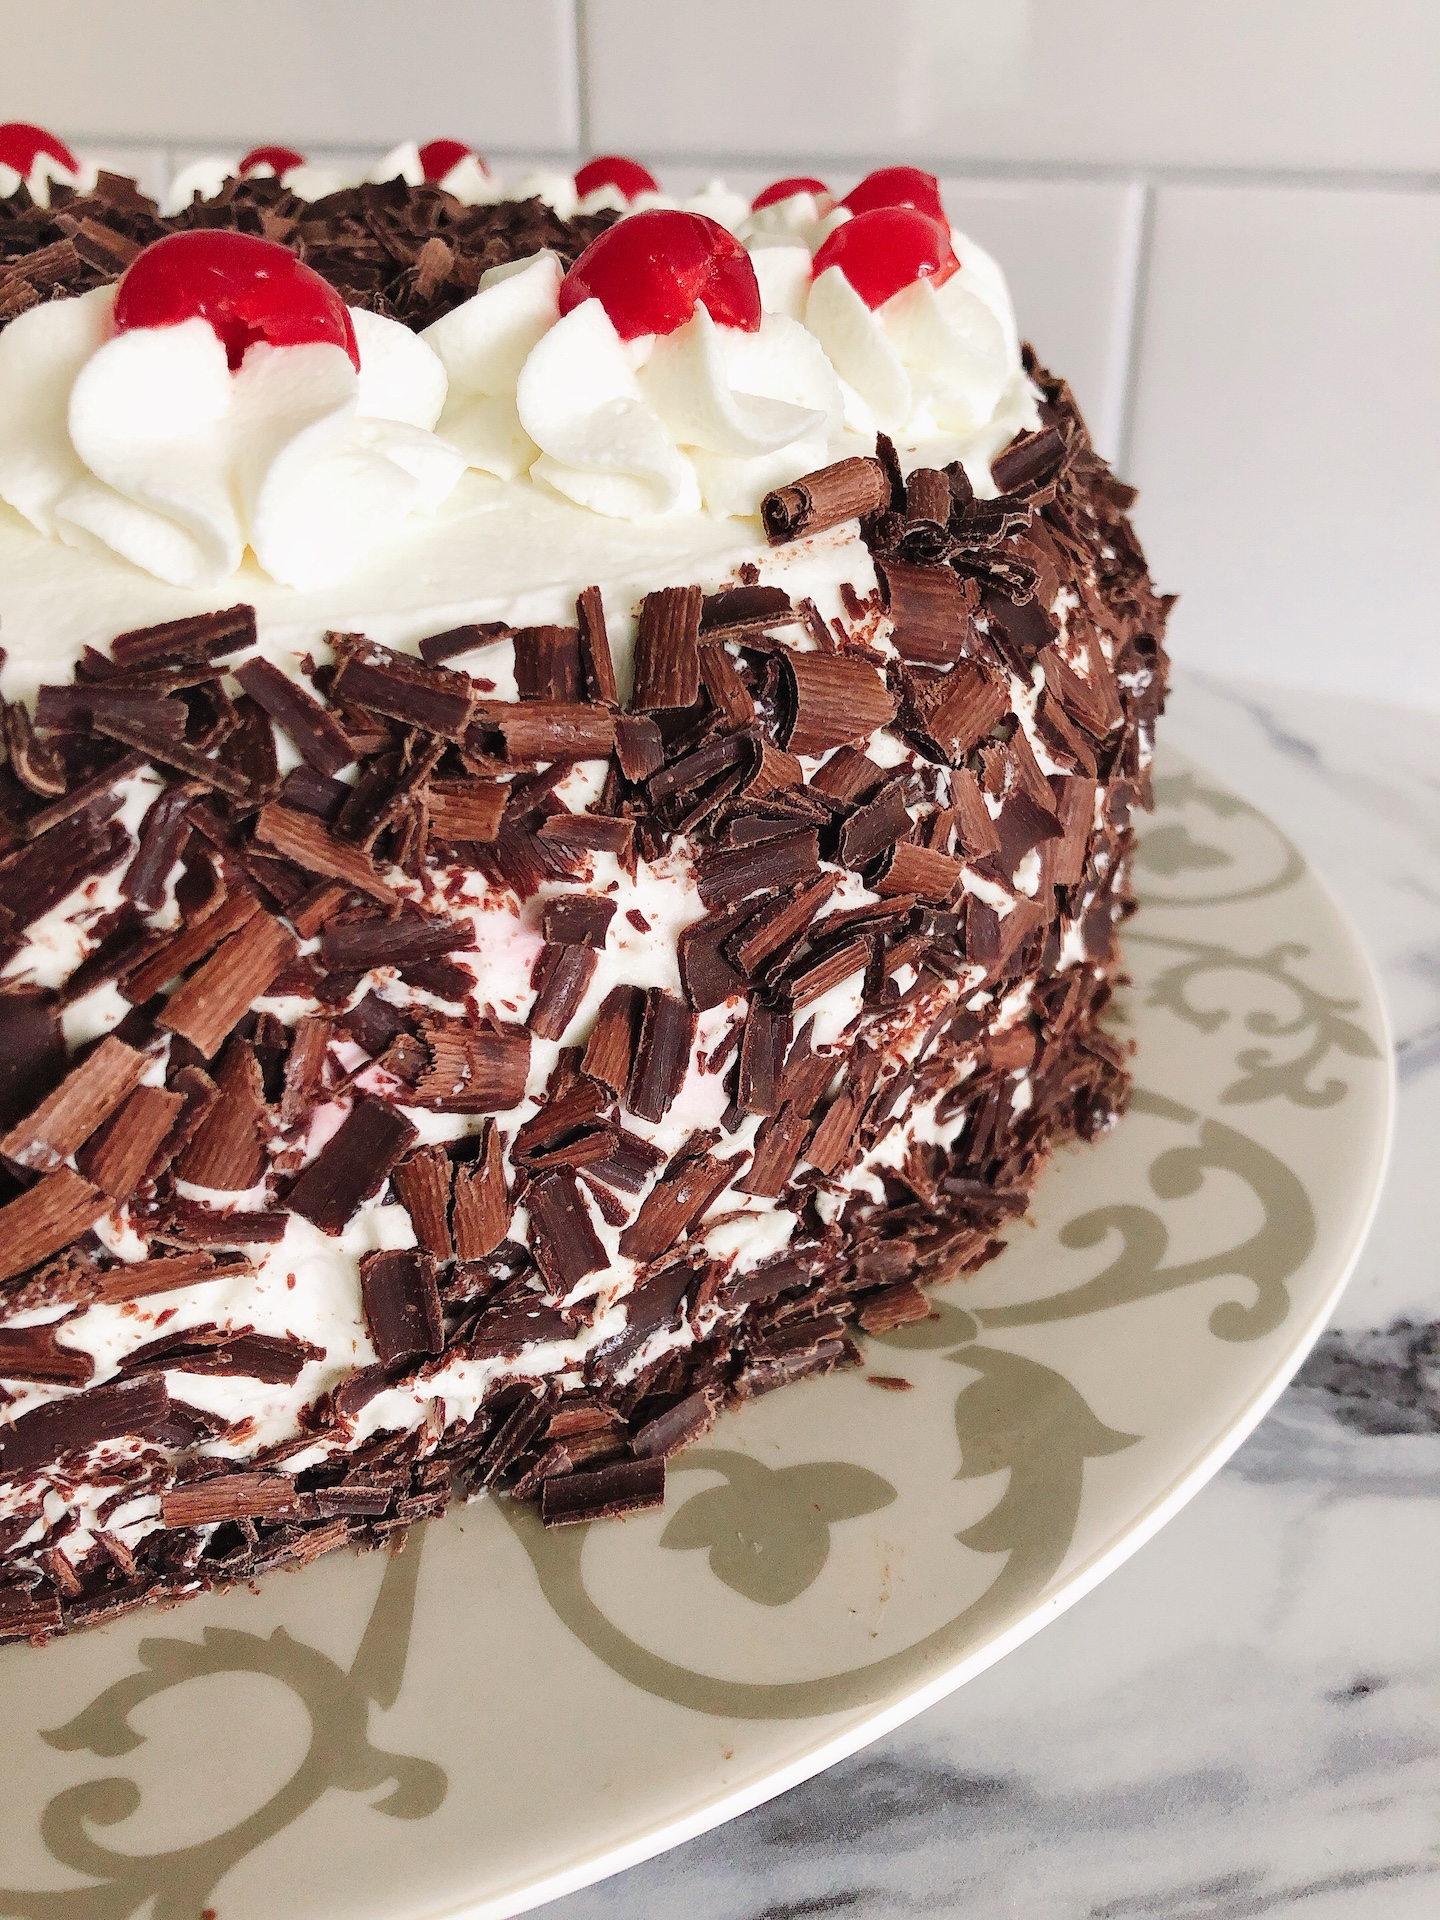 Side view of chocolate shavings and whipping cream florets with maraschino cherries on top of a black forest cake